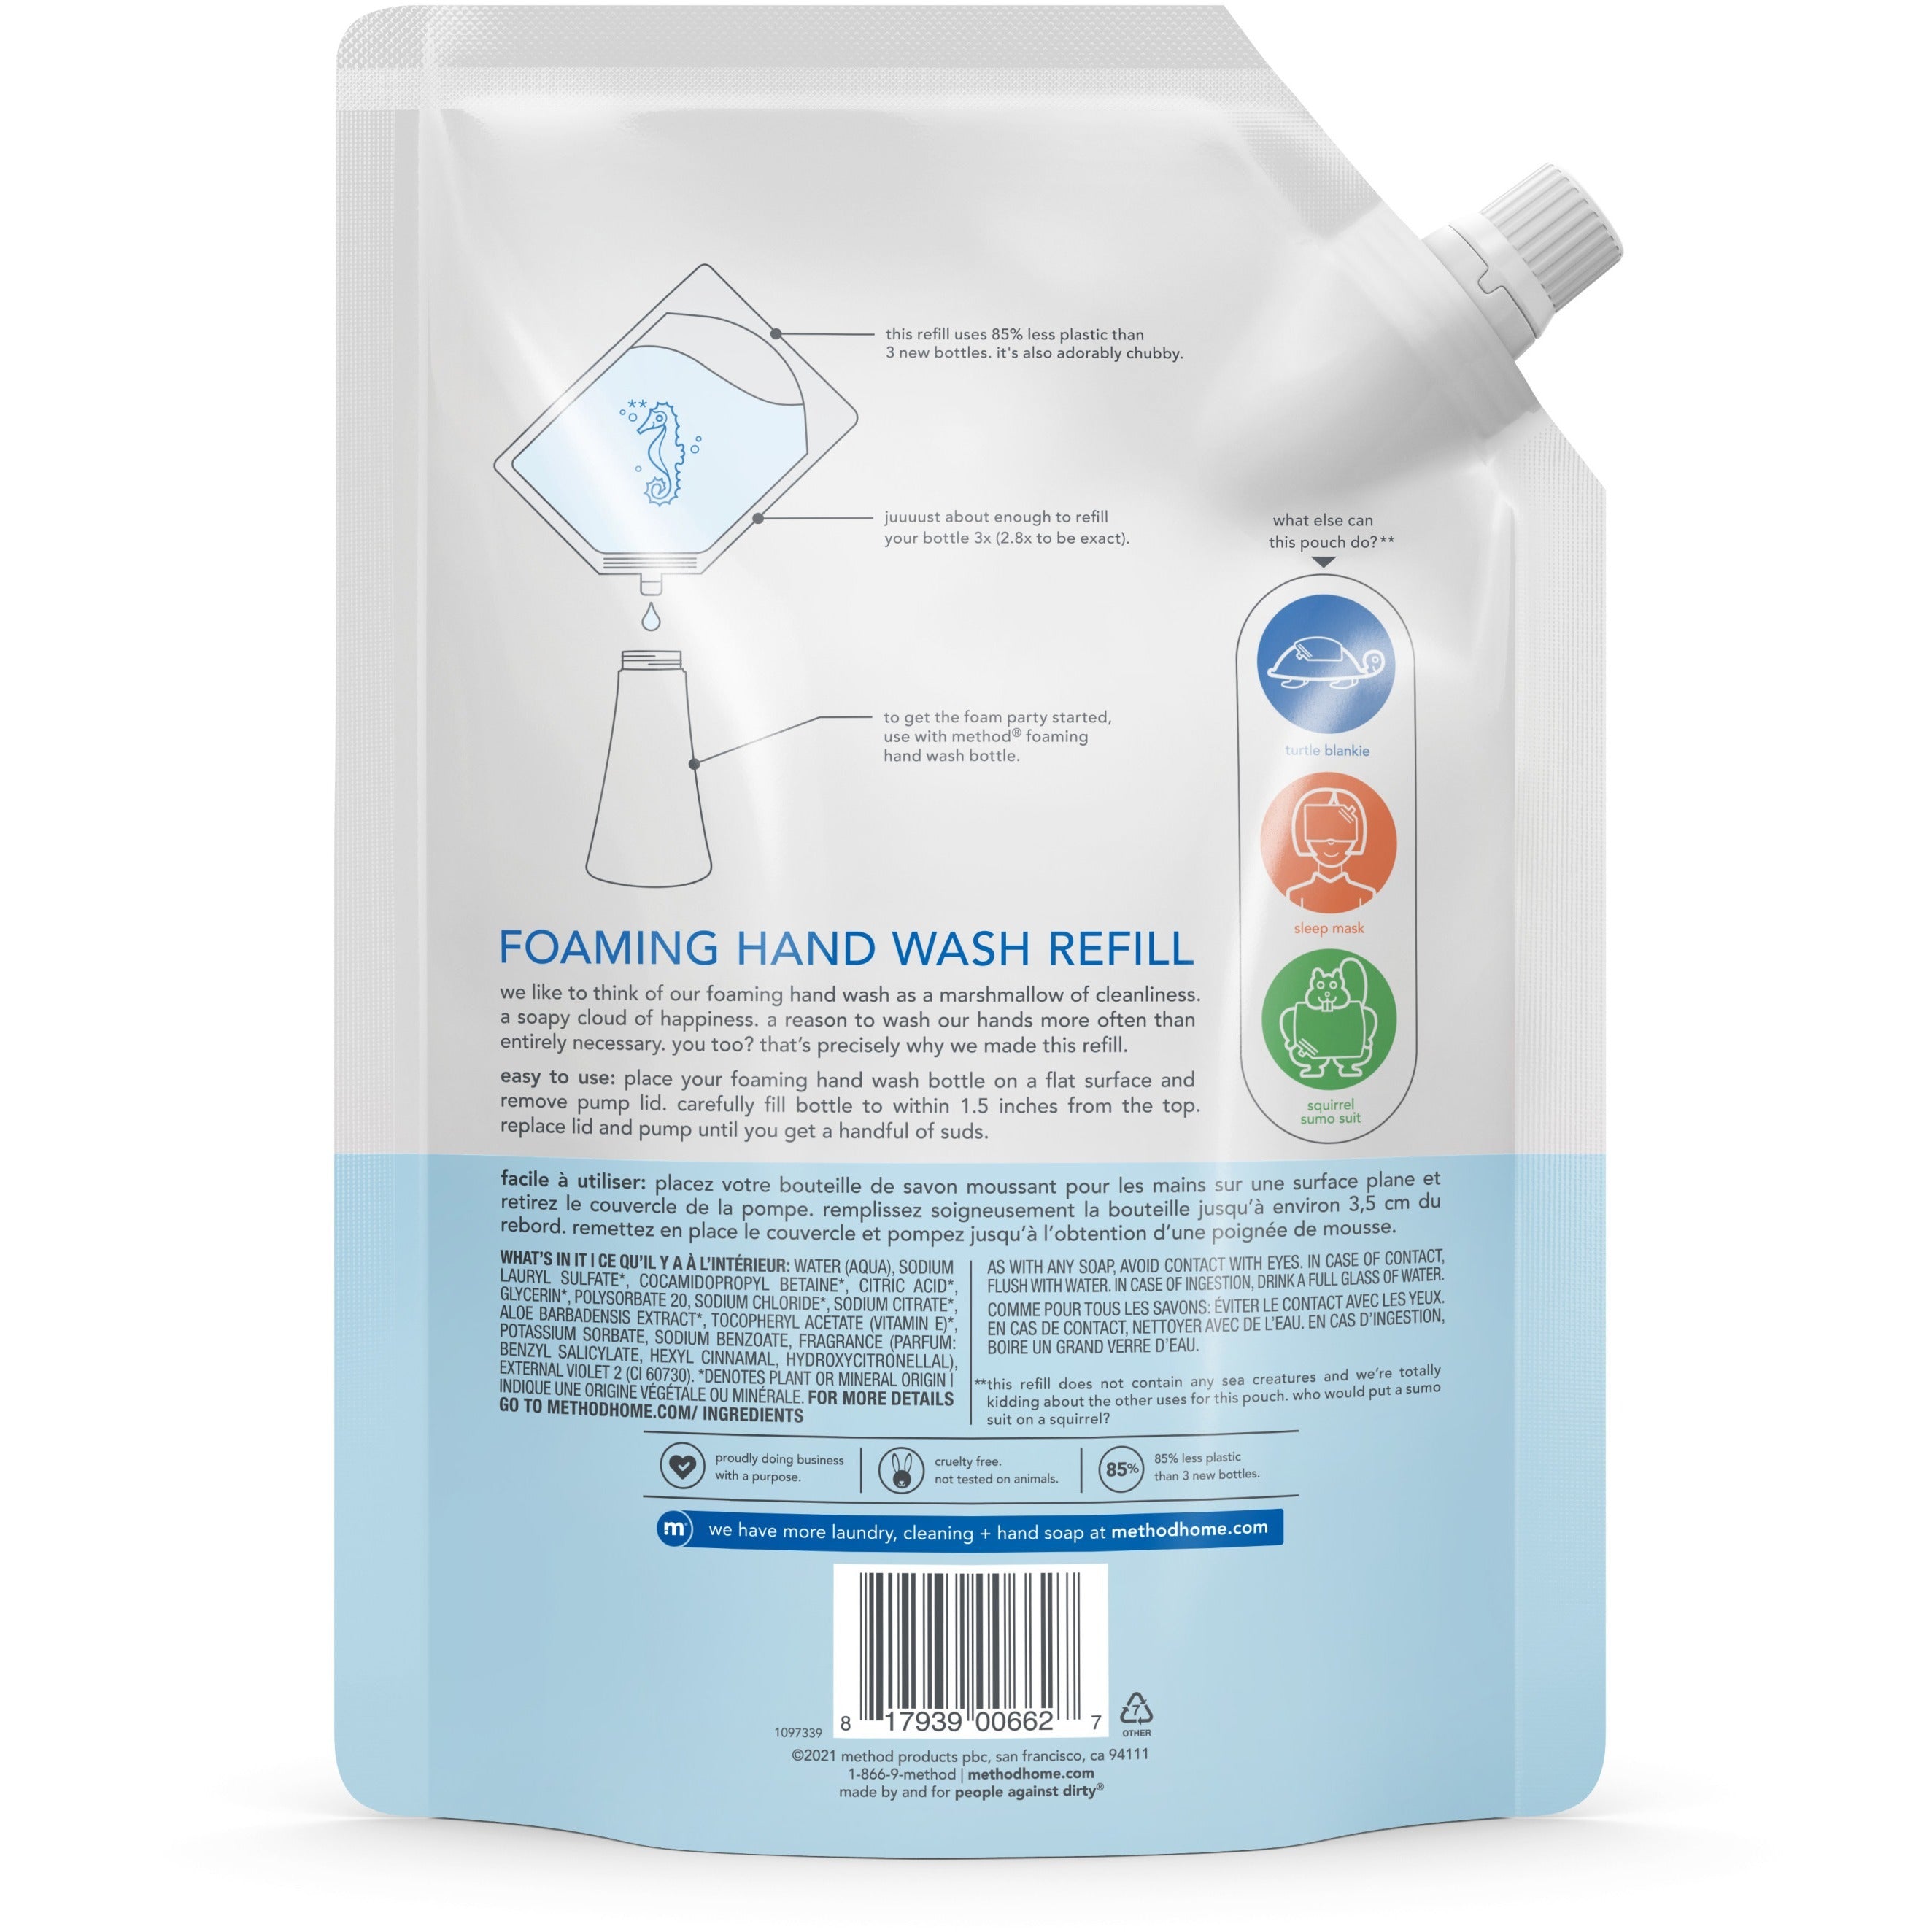 method-foaming-hand-soap-refill-sweet-water-scentfor-28-fl-oz-8281-ml-hand-clear-triclosan-free-1-each_mth00662 - 2